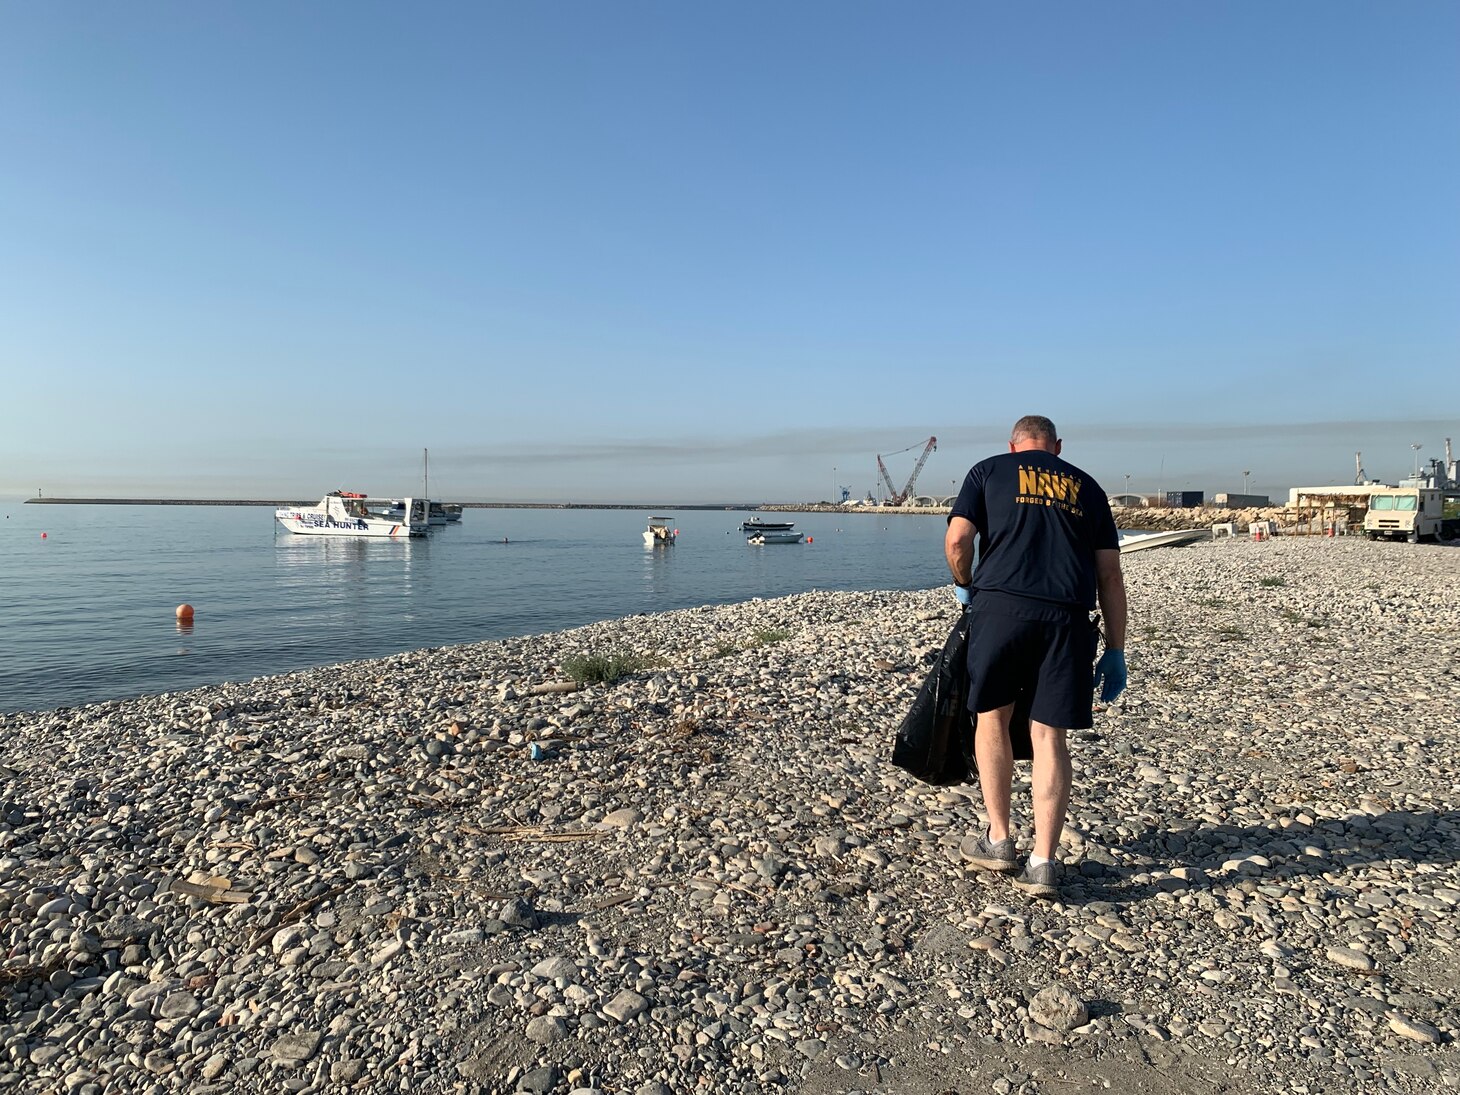 Sailors from Arleigh-Burke class guided missile destroyer USS The Sullivans (DDG 68) participate in a beach cleanup during a scheduled port visit in Limassol, Cyrpus, July 08, 2021.  The Sullivans is on a scheduled deployment with Carrier Strike Group 21. U.S. Sixth Fleet, headquartered in Naples, Italy, conducts the full spectrum of joint and naval operations, often in concert with allied and interagency partners, in order to advance U.S. national interests and security and stability in Europe and Africa.